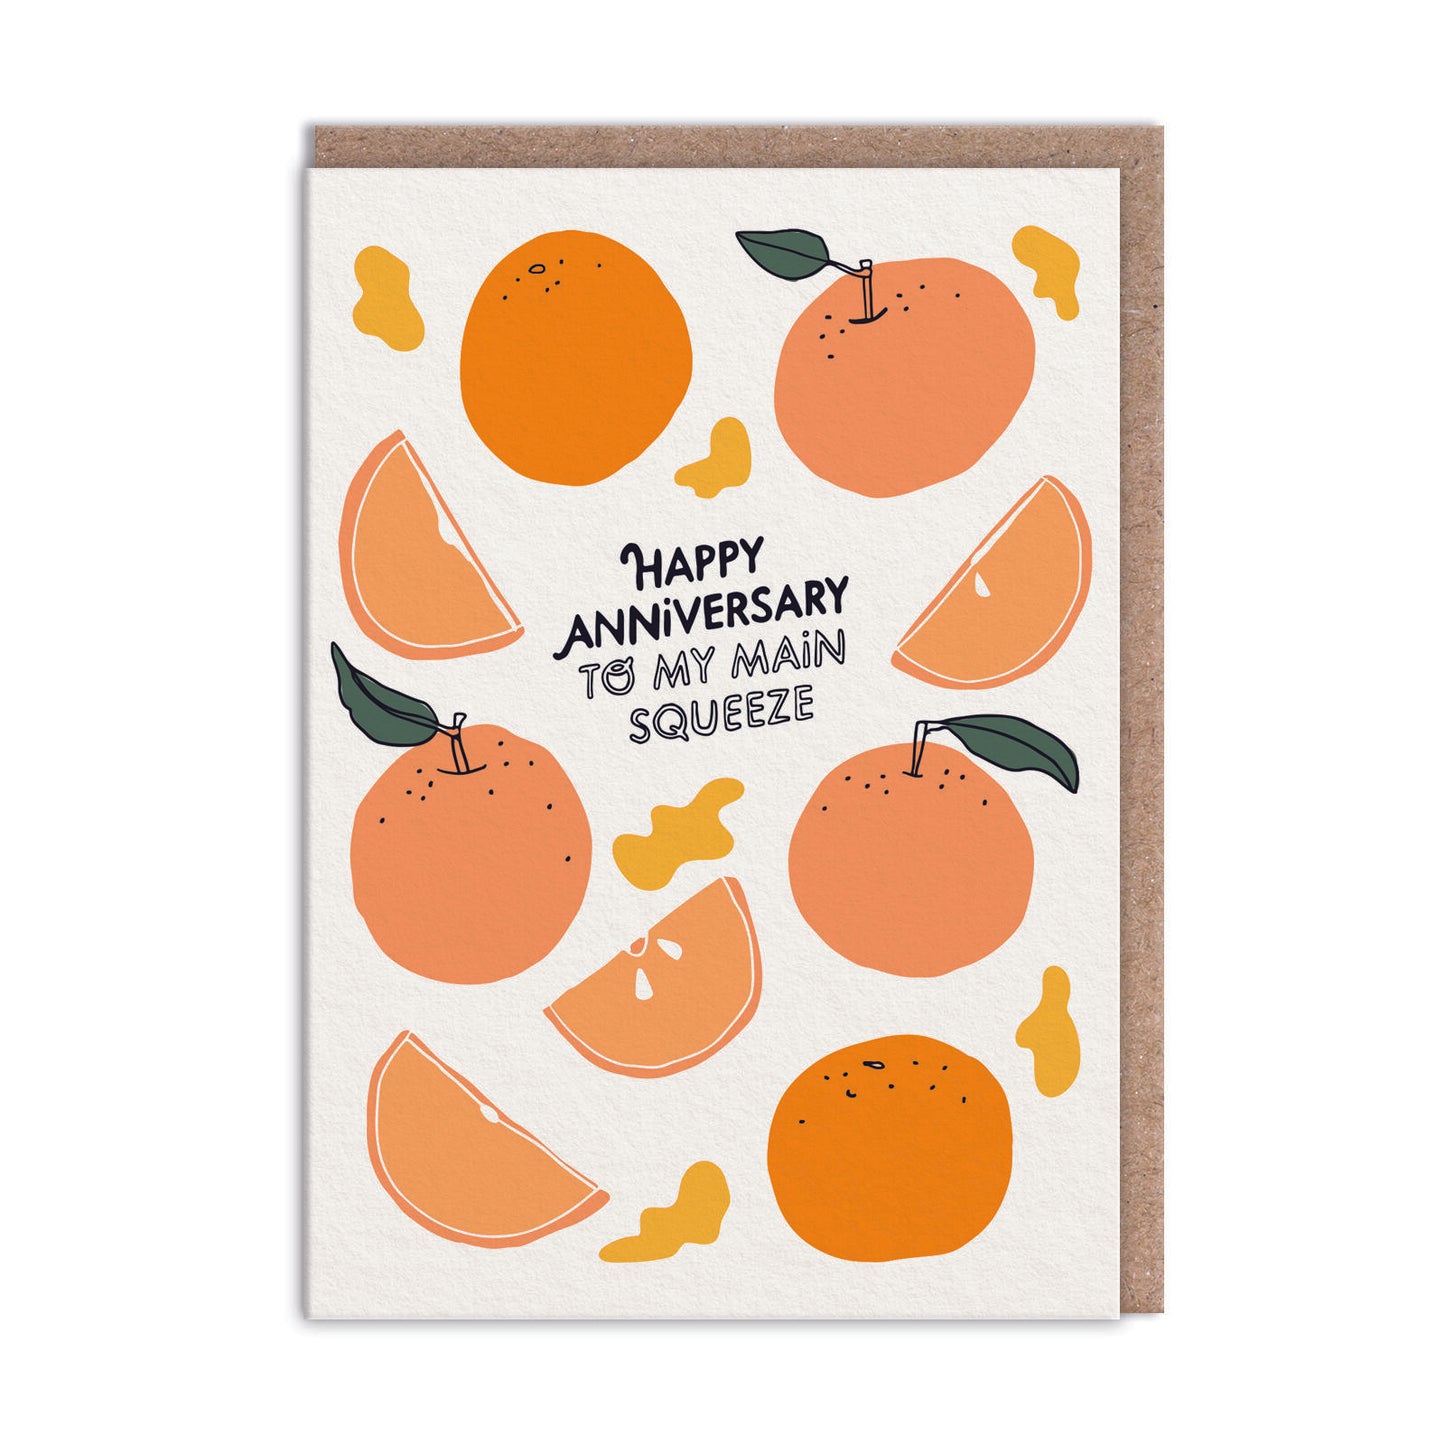 Anniversary card with illustrations of oranges. Text reads "Happy Anniversary To My Main Squeeze"